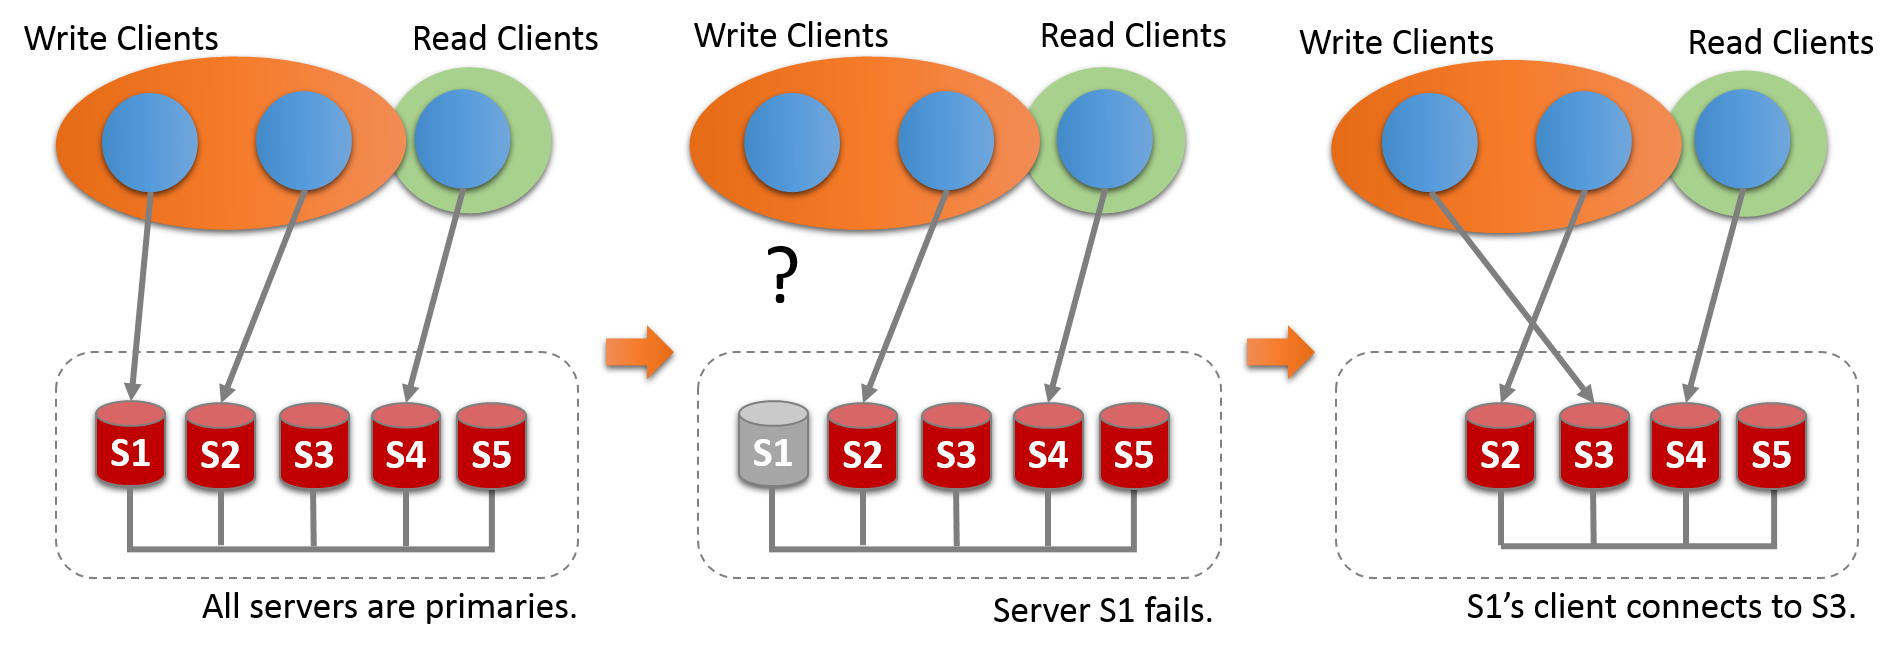 Five server instances, S1, S2, S3, S4, and S5, are deployed as an interconnected group. All of the servers are primaries. Write clients are communicating with servers S1 and S2, and a read client is communicating with server S4. Server S1 then fails, breaking communication with its write client. This client reconnects to server S3.